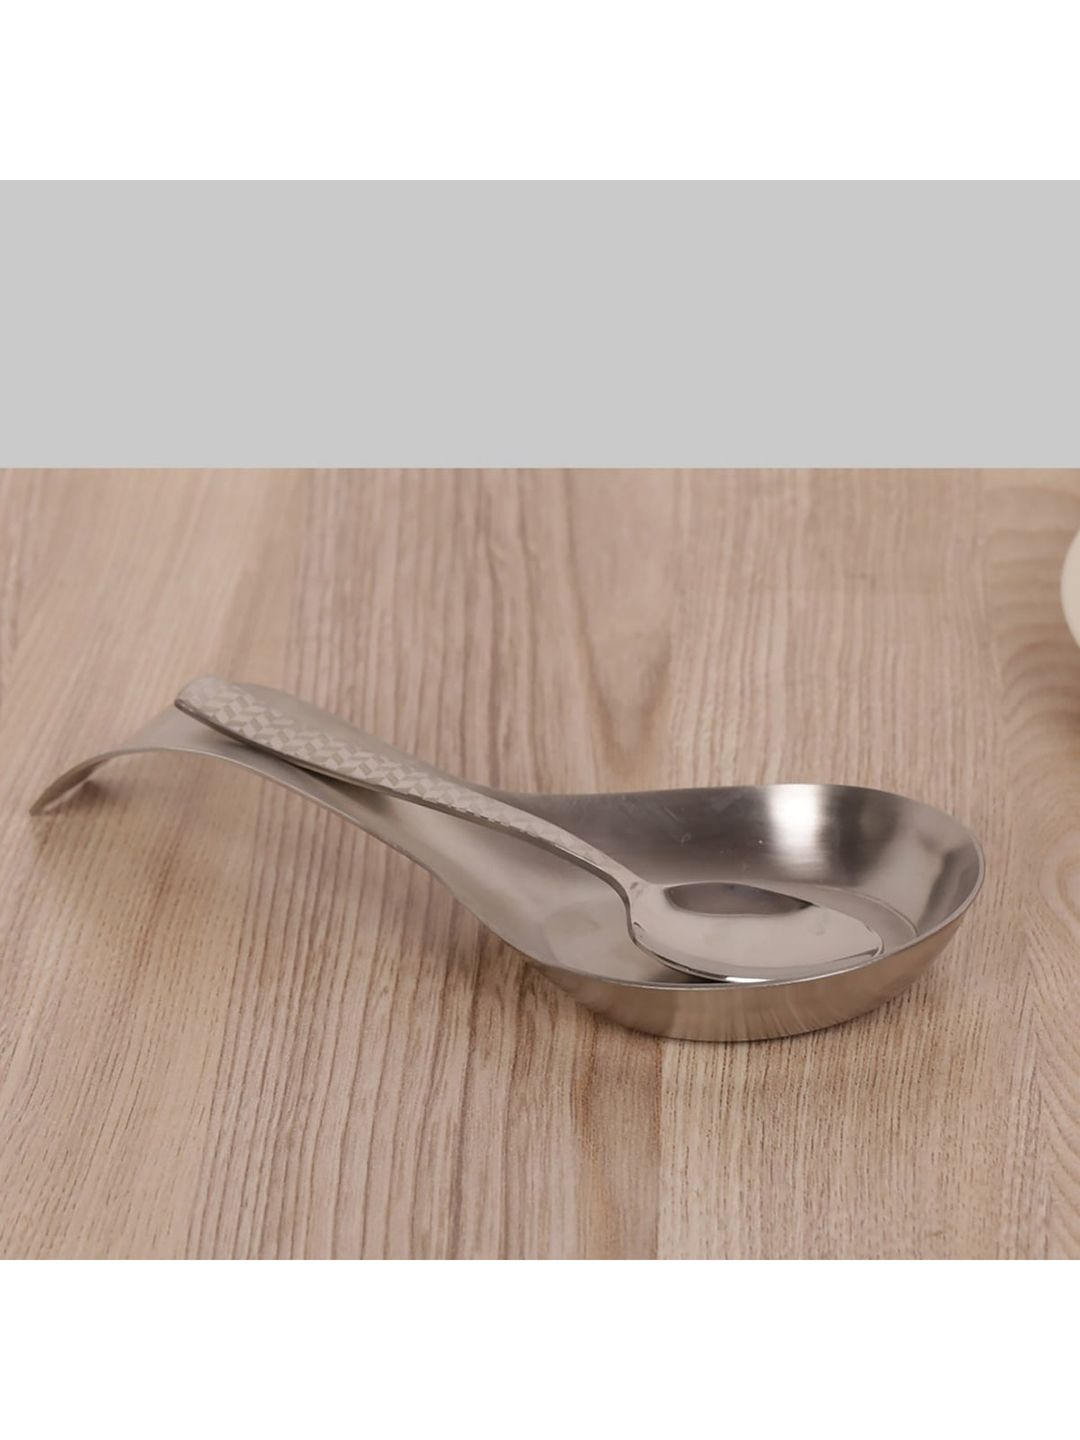 Home Centre Silver-Toned Stainless Steel Spoon Price in India